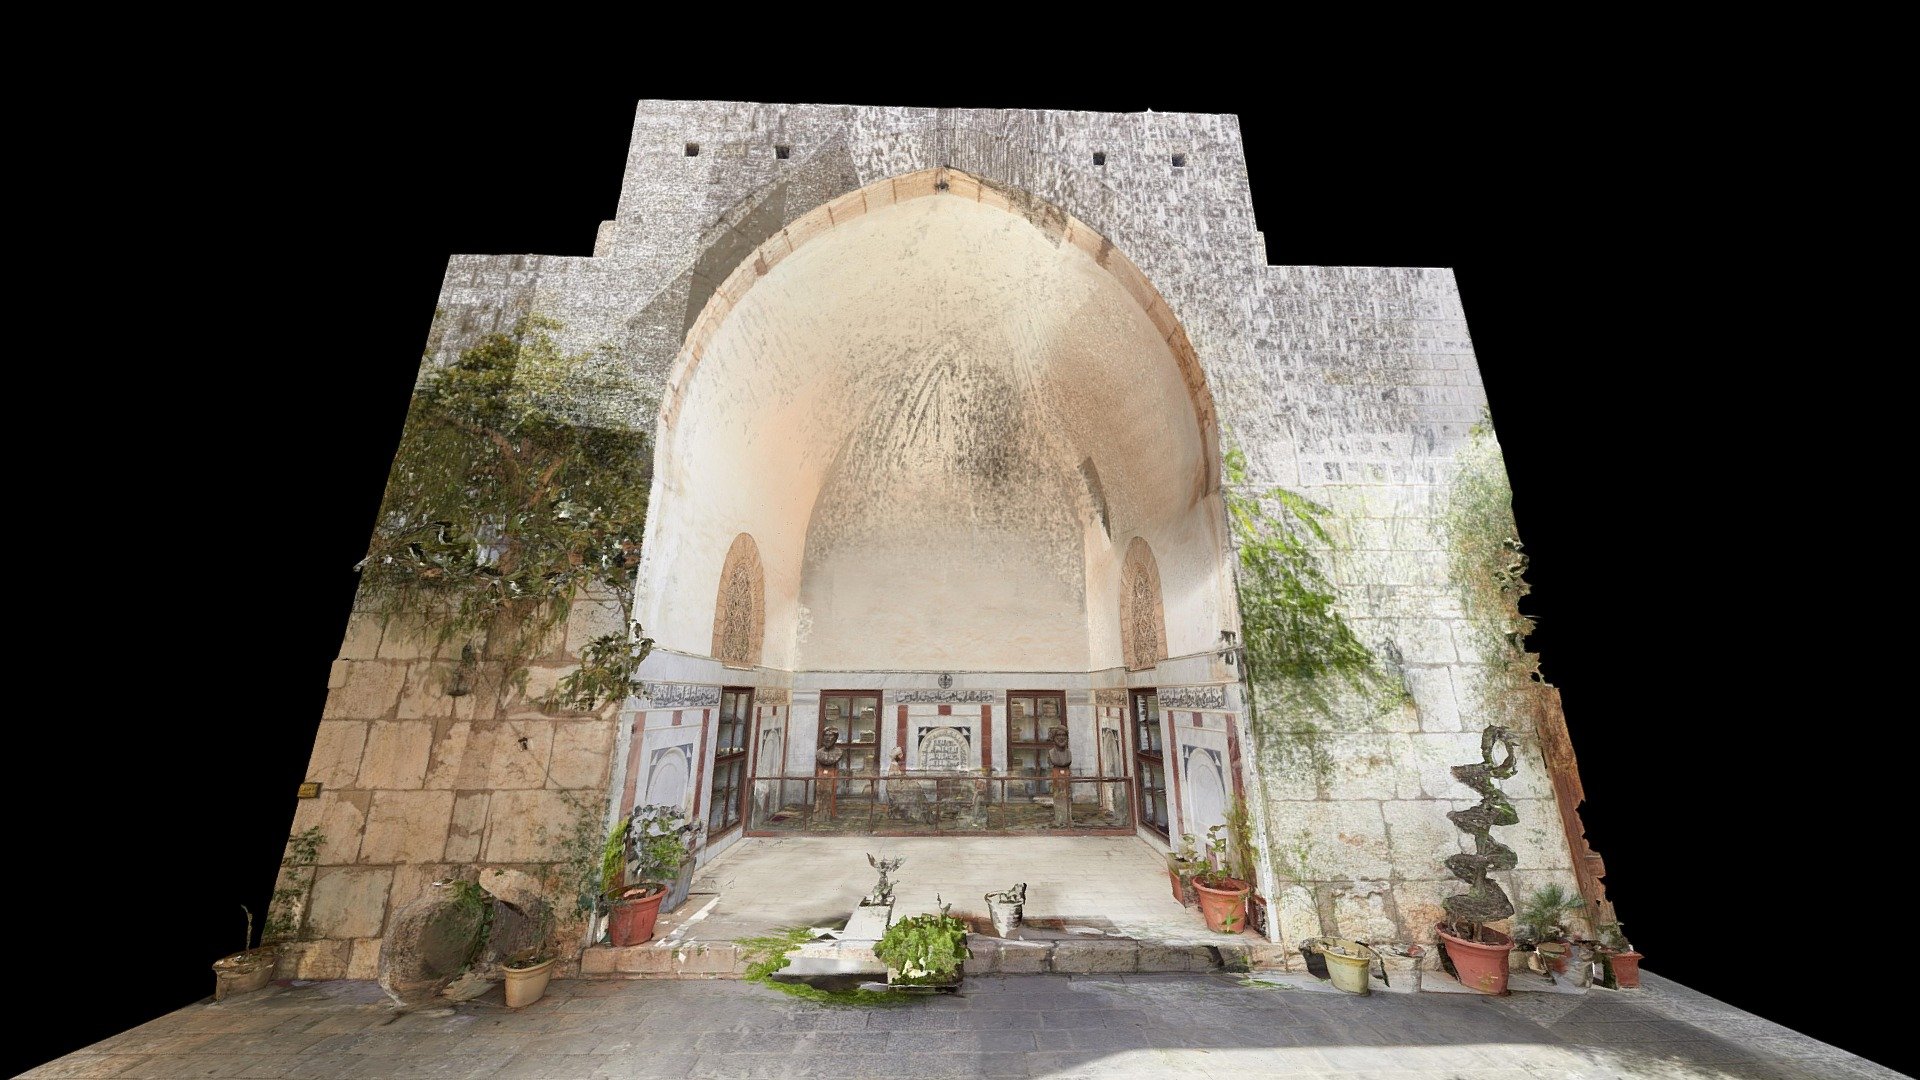 Lidar data, from open heritage. Mesh combining photogrammetry and lidar data.

Over eight centuries old, the Bimaristan Nur al-Din, is the earliest surviving site for the development of Islamic medicine. Throughout the building’s lifetime, the site has functioned as a medical school as well as a place of healing in the heart of the old city of Damascus. Built in 1154, the building is characterized by its red brick muqarnas, elaborate entrance block, and finely carved wooden doors. The hospital was in use until the 20th century when it was converted into a Museum of Arabic Medicine and Science. The preservation of the building is a reminder of the major contributions of Islamic medicine to the world today.

CyArk 2019: Bimaristan Nur al-Din - LiDAR - Terrestrial , Photogrammetry - Terrestrial . Collected by Directorate General of Antiquities and Museums . Distrubuted by Open Heritage 3D. https://doi.org/10.26301/nkv2-bn91 - Bimaristan Nur Al- Din, Syria Mesh_Part1 - Download Free 3D model by Fovea (@3dfovea) 3d model